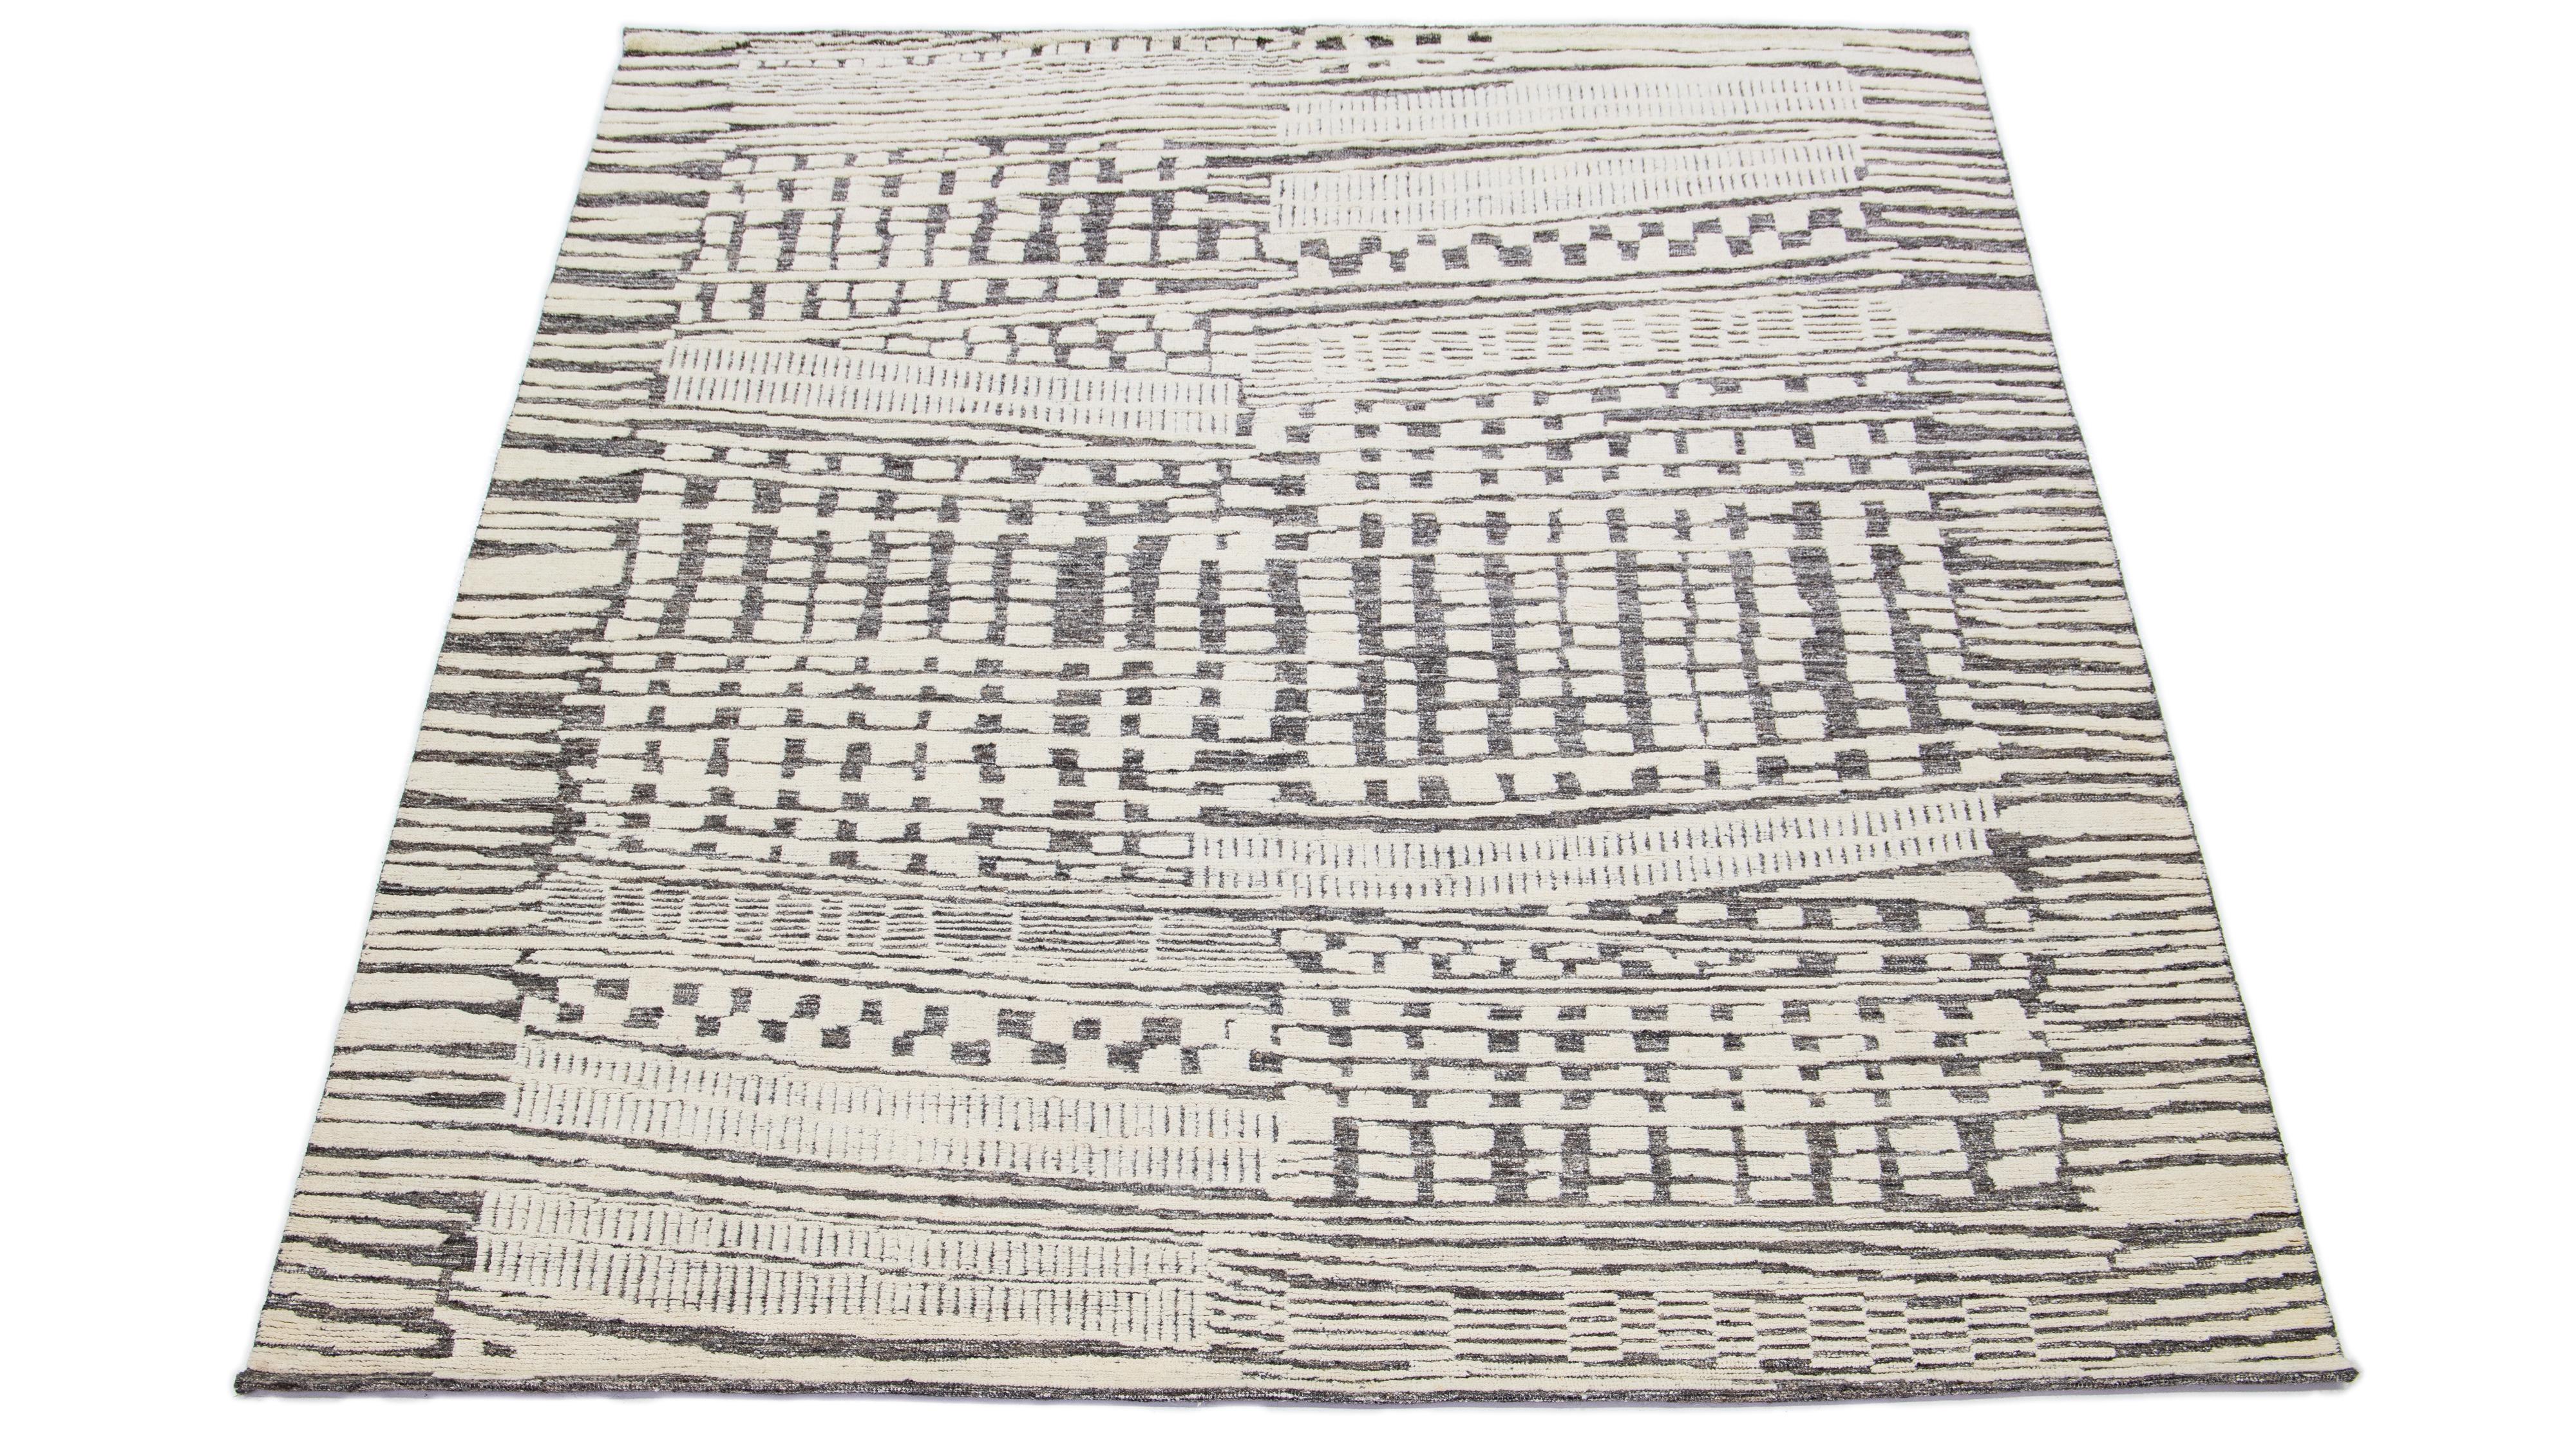 This hand-knotted wool rug showcases a modern Moroccan-inspired motif highlighting understated beige hues against a bold gray foundation, creating a captivating abstract Design.

This rug measures 8'2